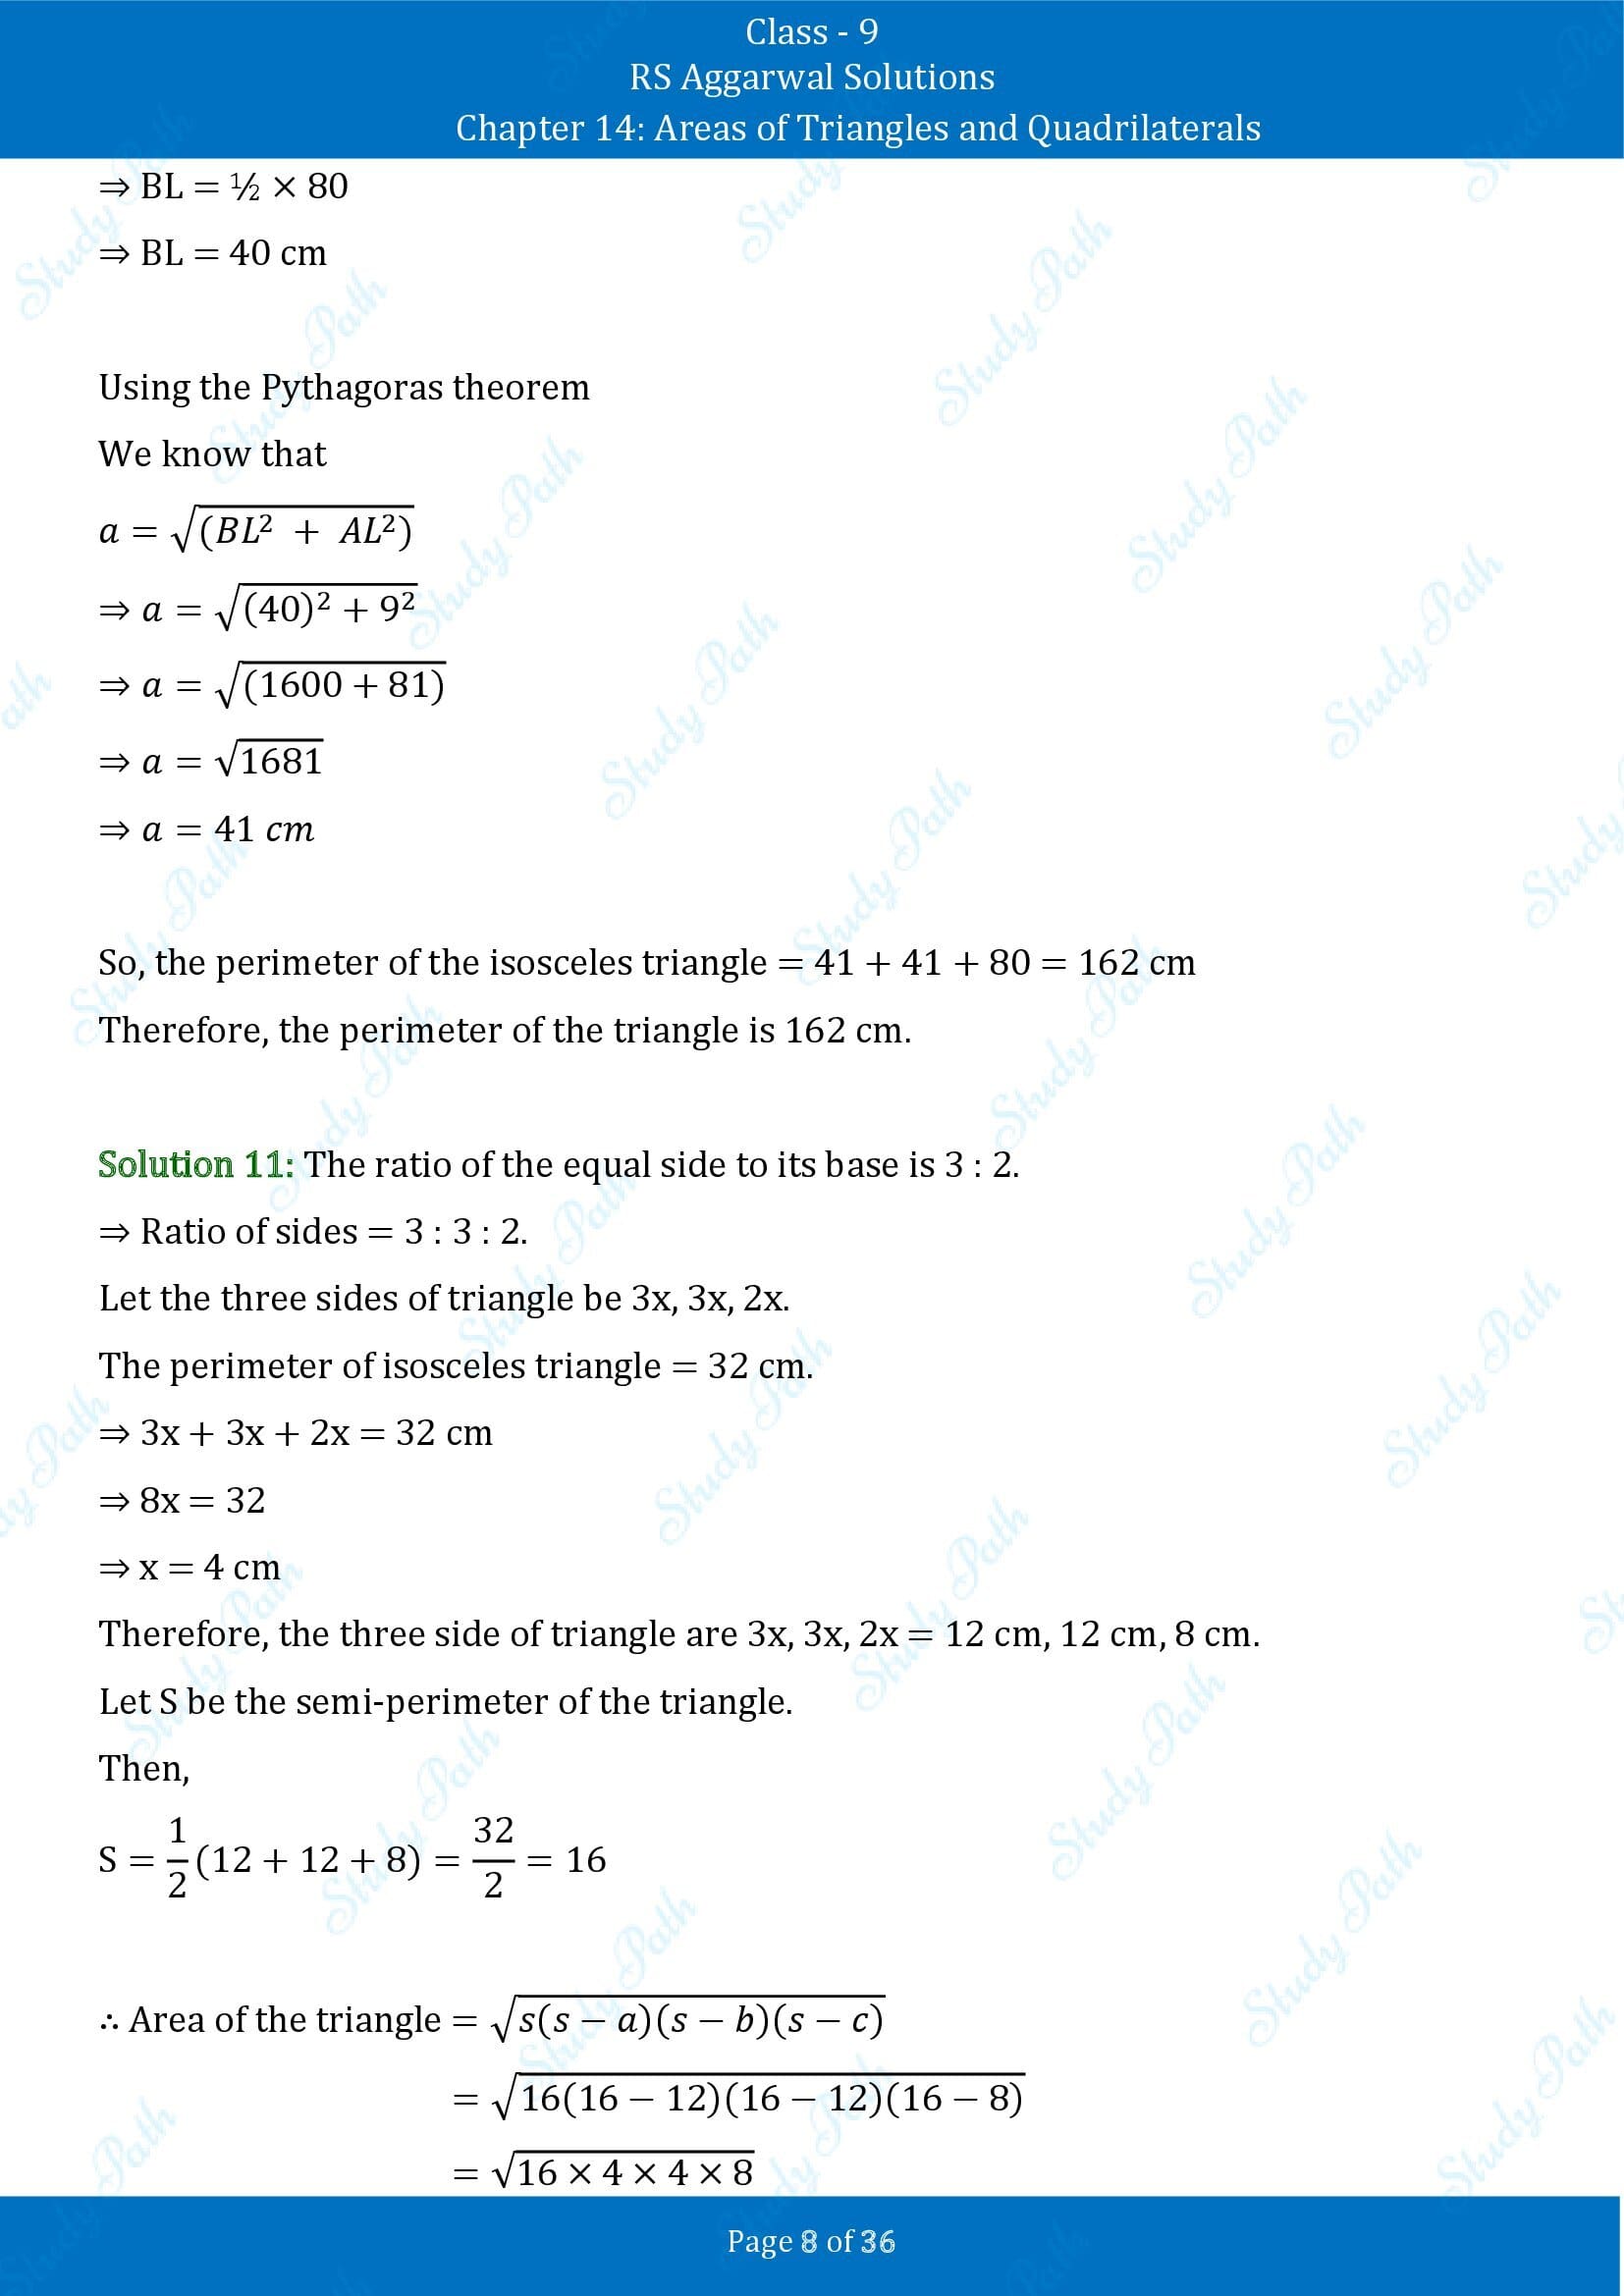 RS Aggarwal Solutions Class 9 Chapter 14 Areas of Triangles and Quadrilaterals Exercise 14 00008